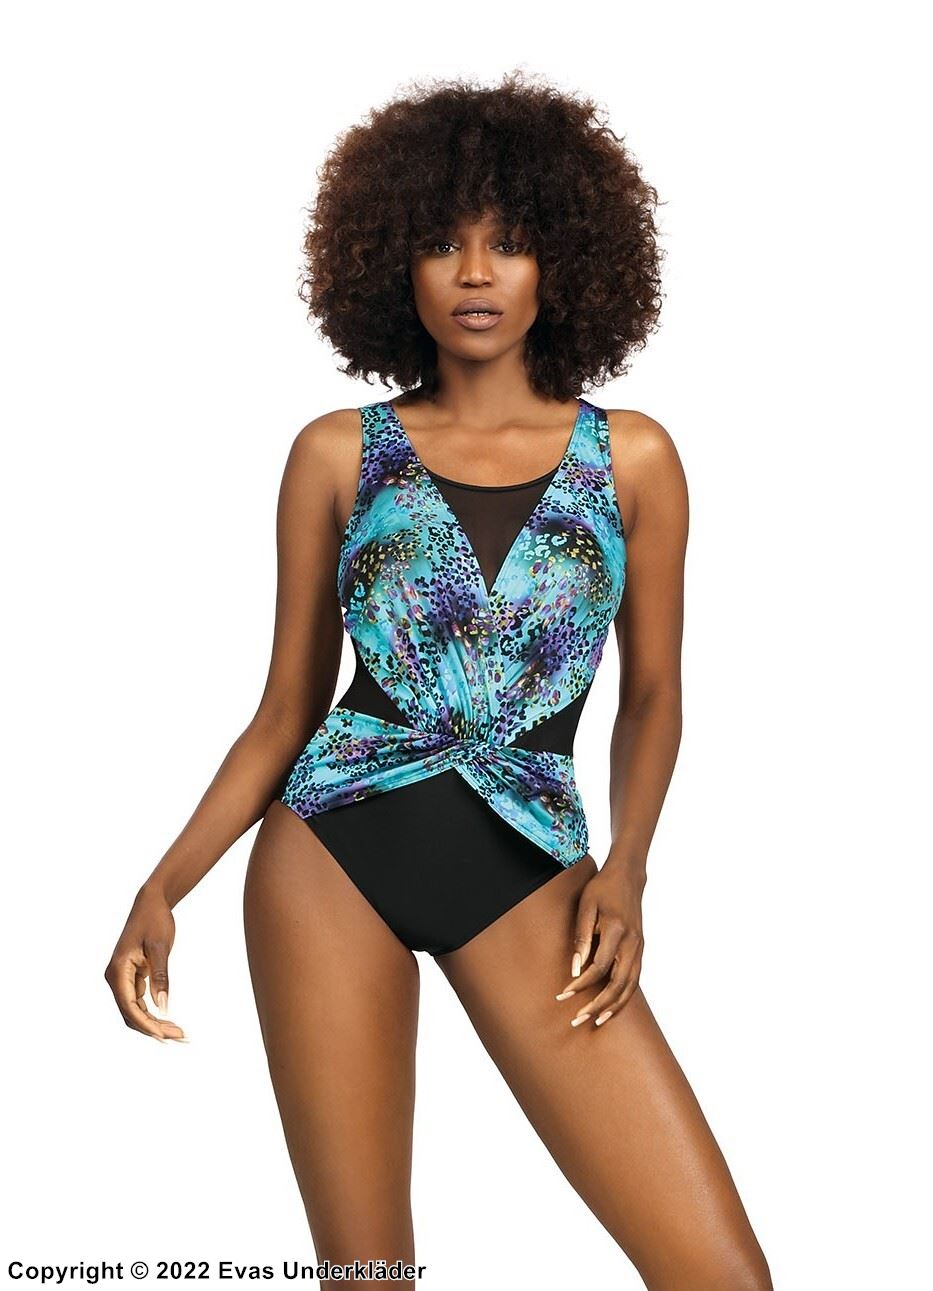 One-piece swimsuit, wide shoulder straps, mesh inlay, wrinkles, colorful leopard (pattern)